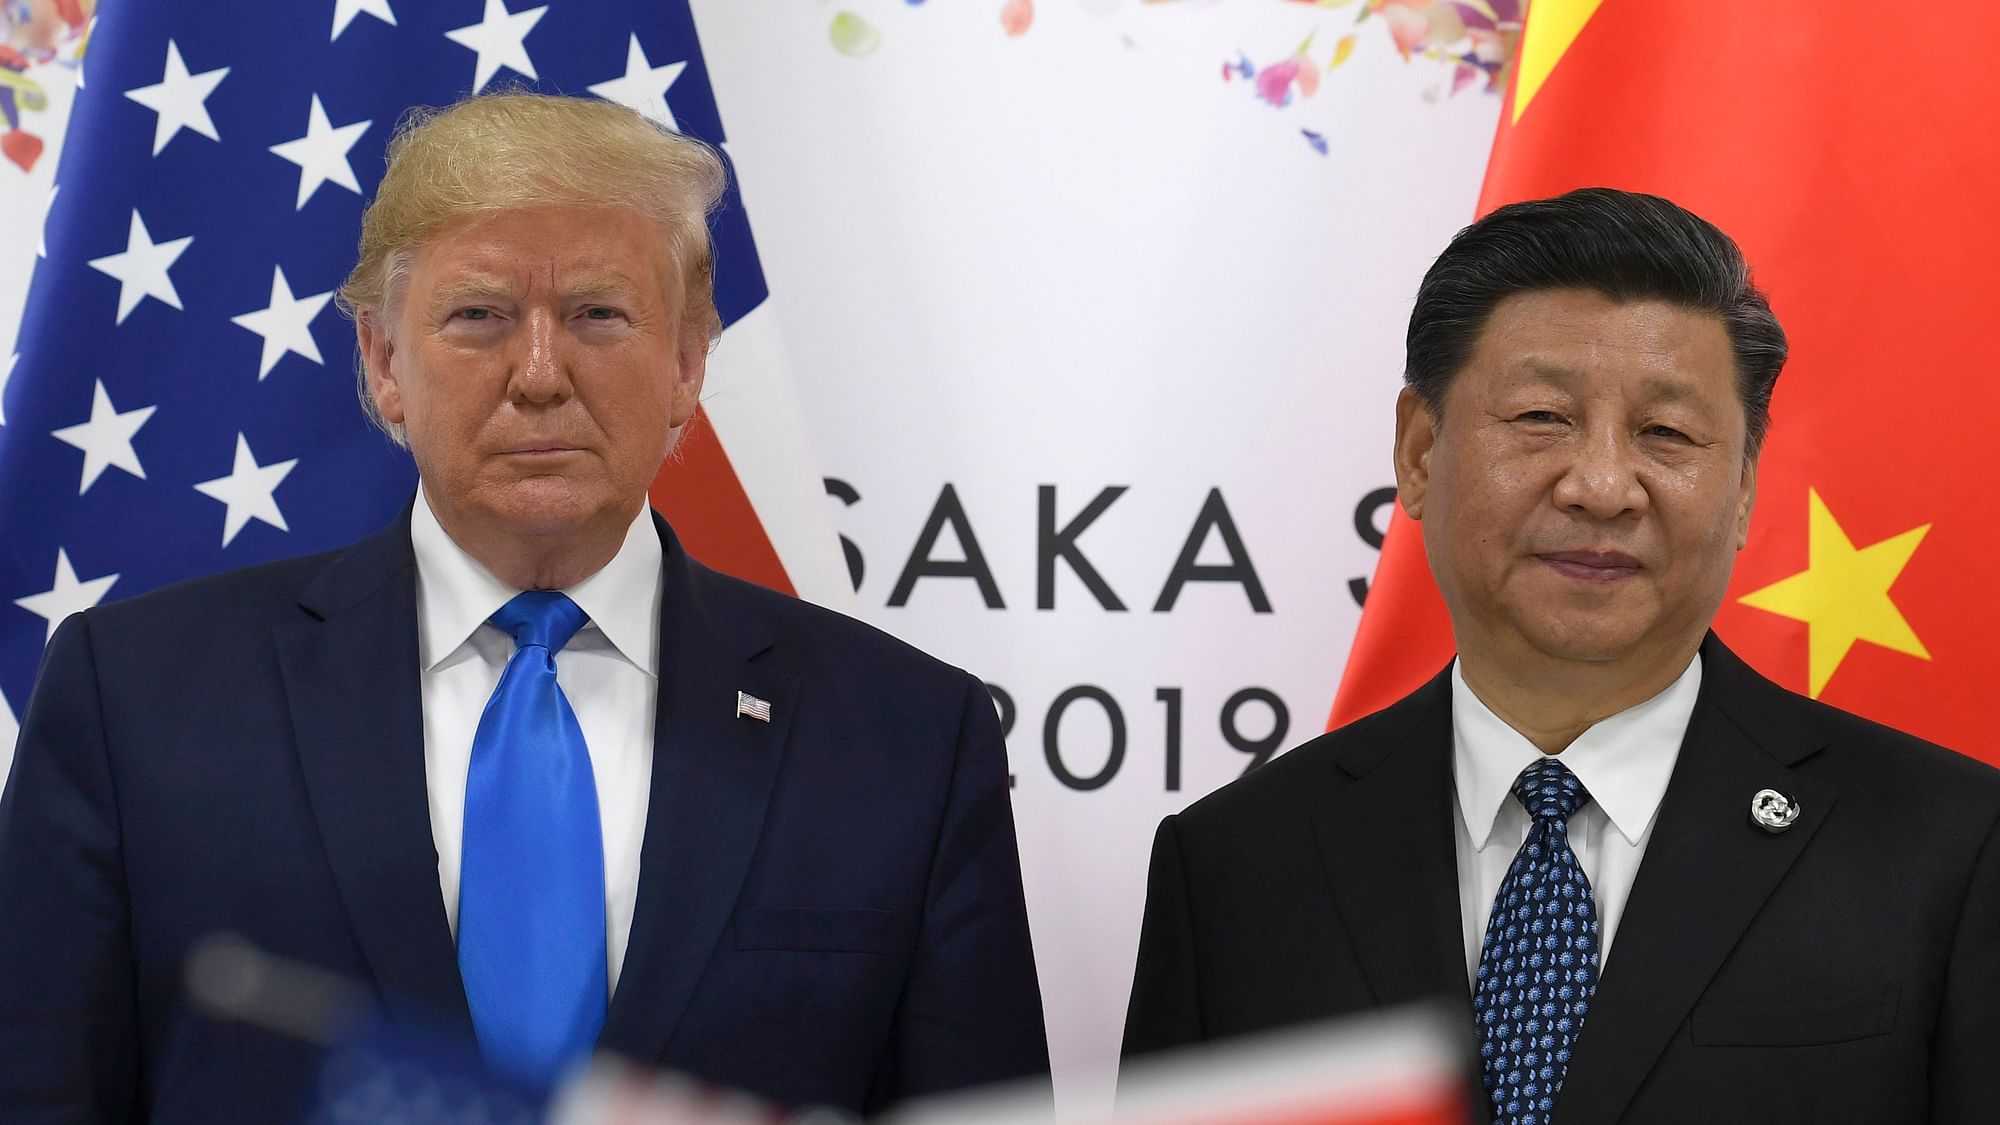 Left: US President Donald Trump. Right: Chinese President Xi Jinping.